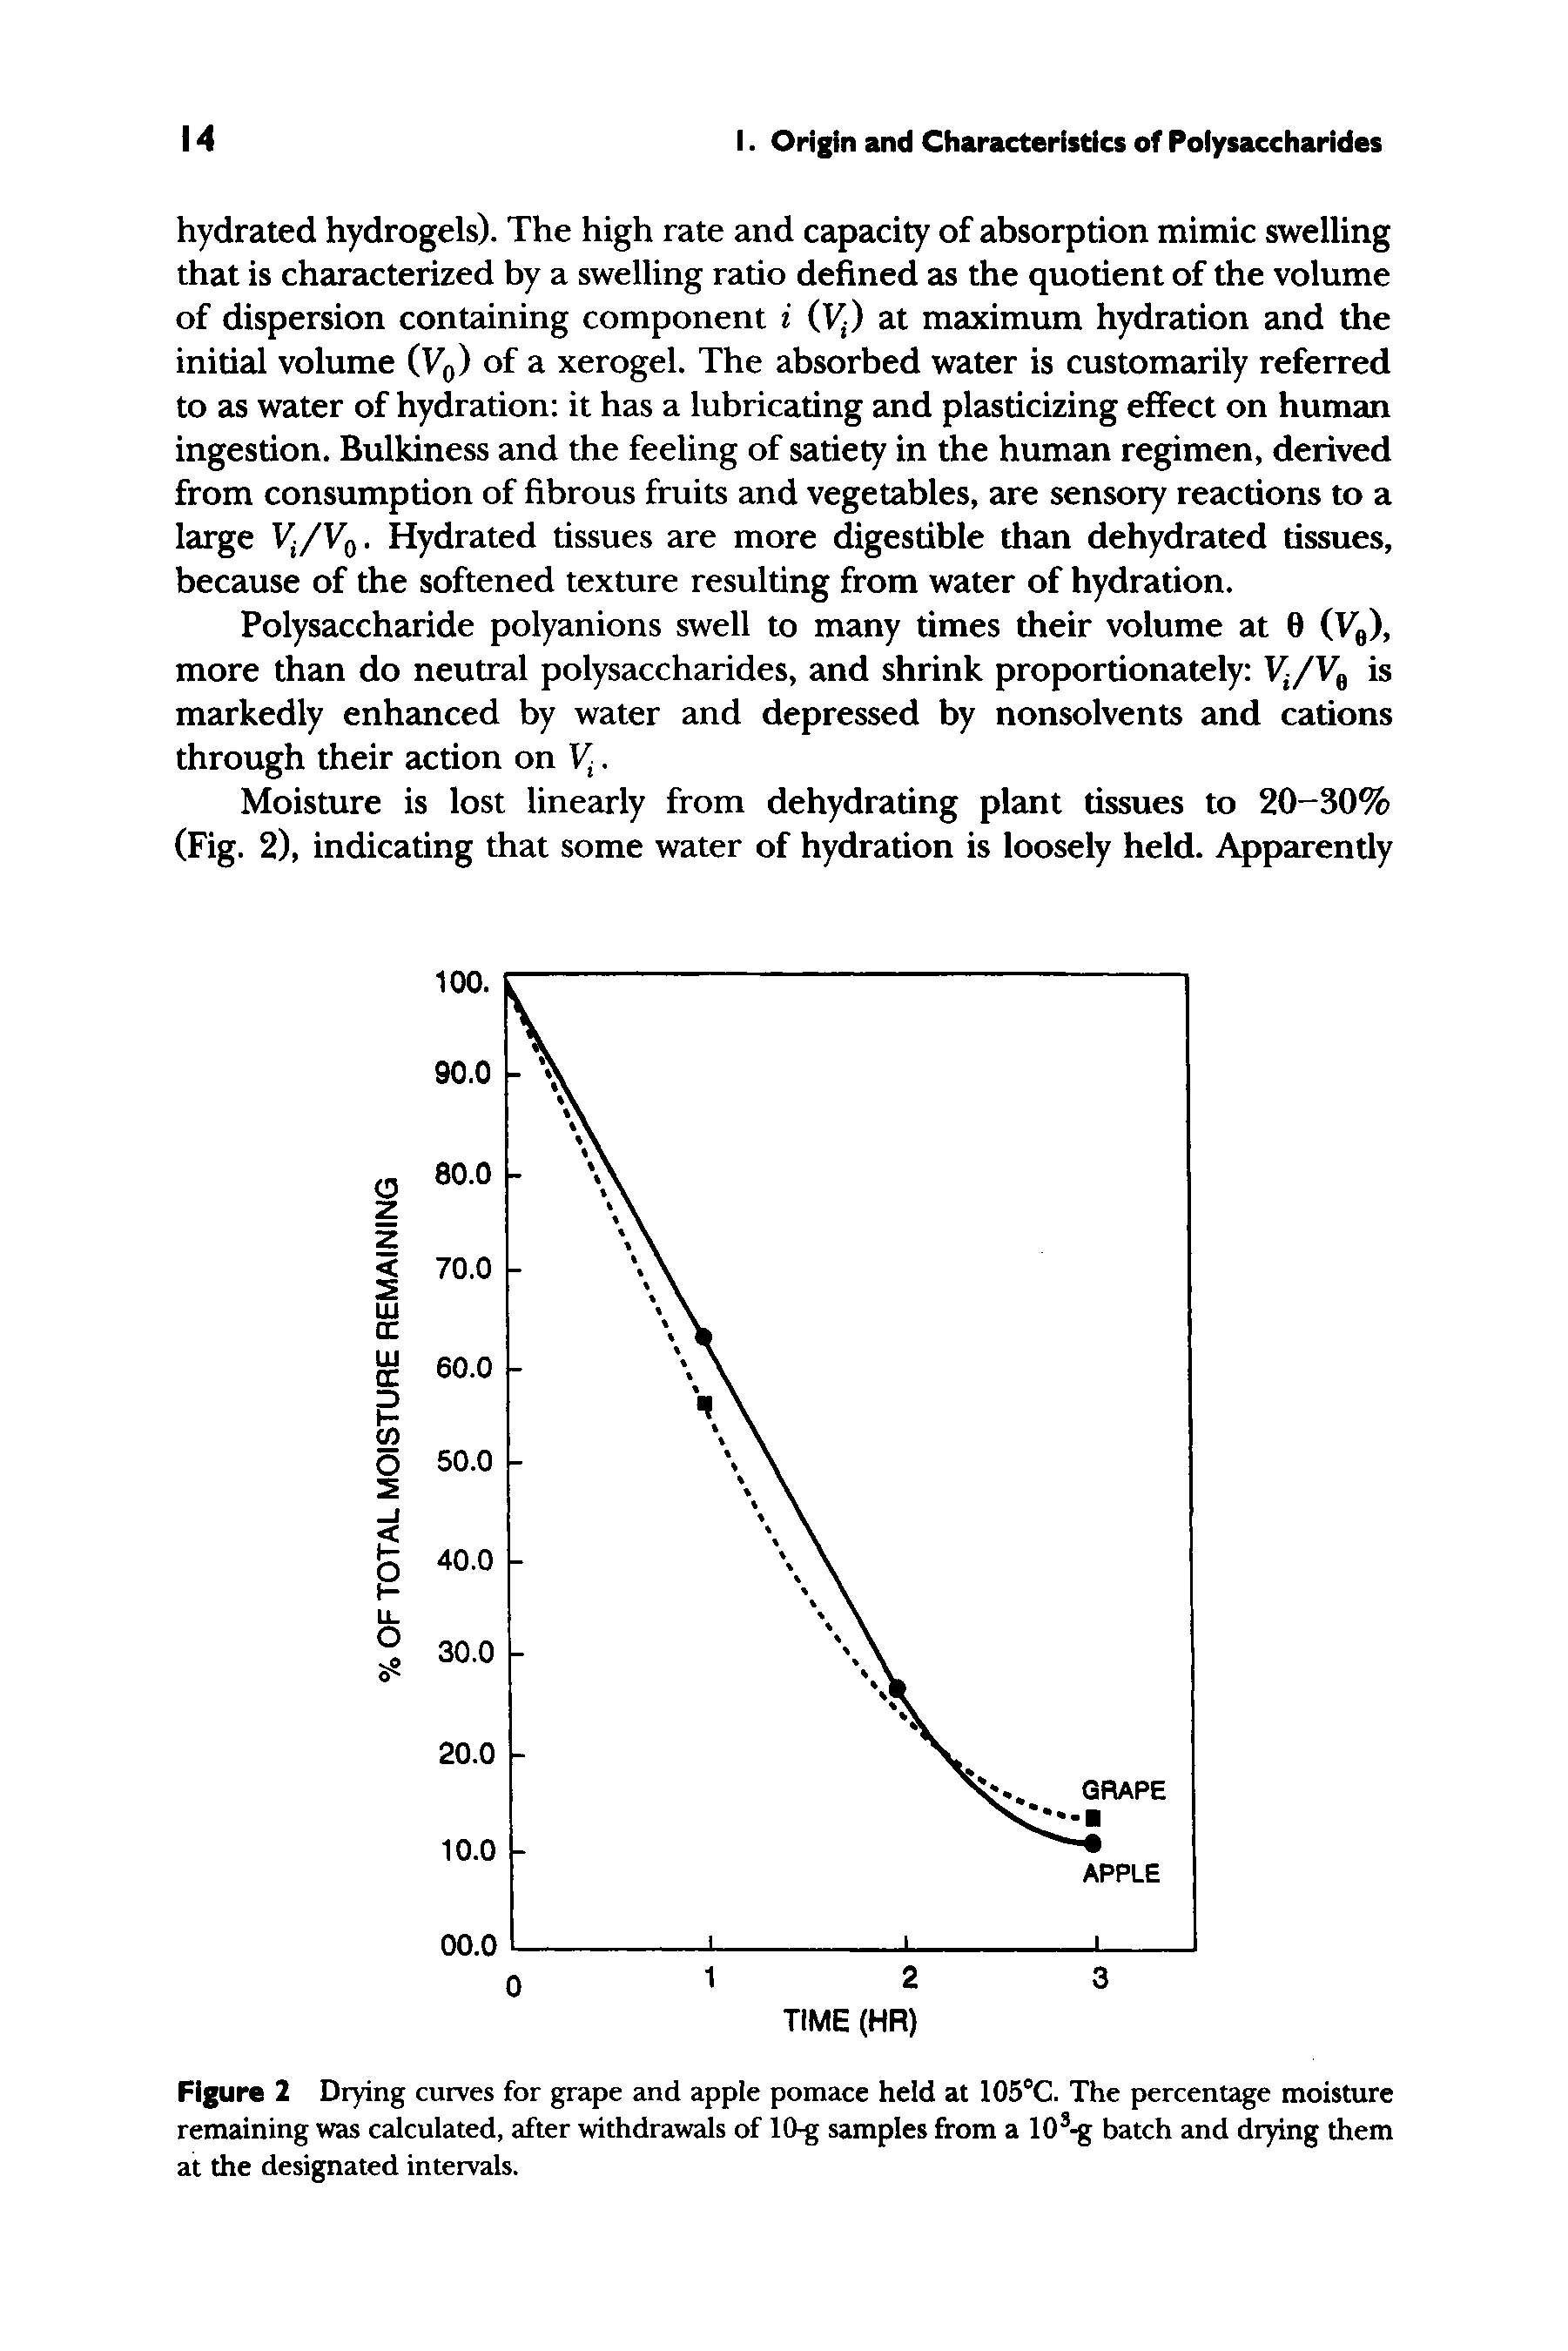 Figure 2 Drying curves for grape and apple pomace held at 105°C. The percentage moisture remaining was calculated, after withdrawals of 10-g samples from a 103-g batch and drying them at the designated intervals.